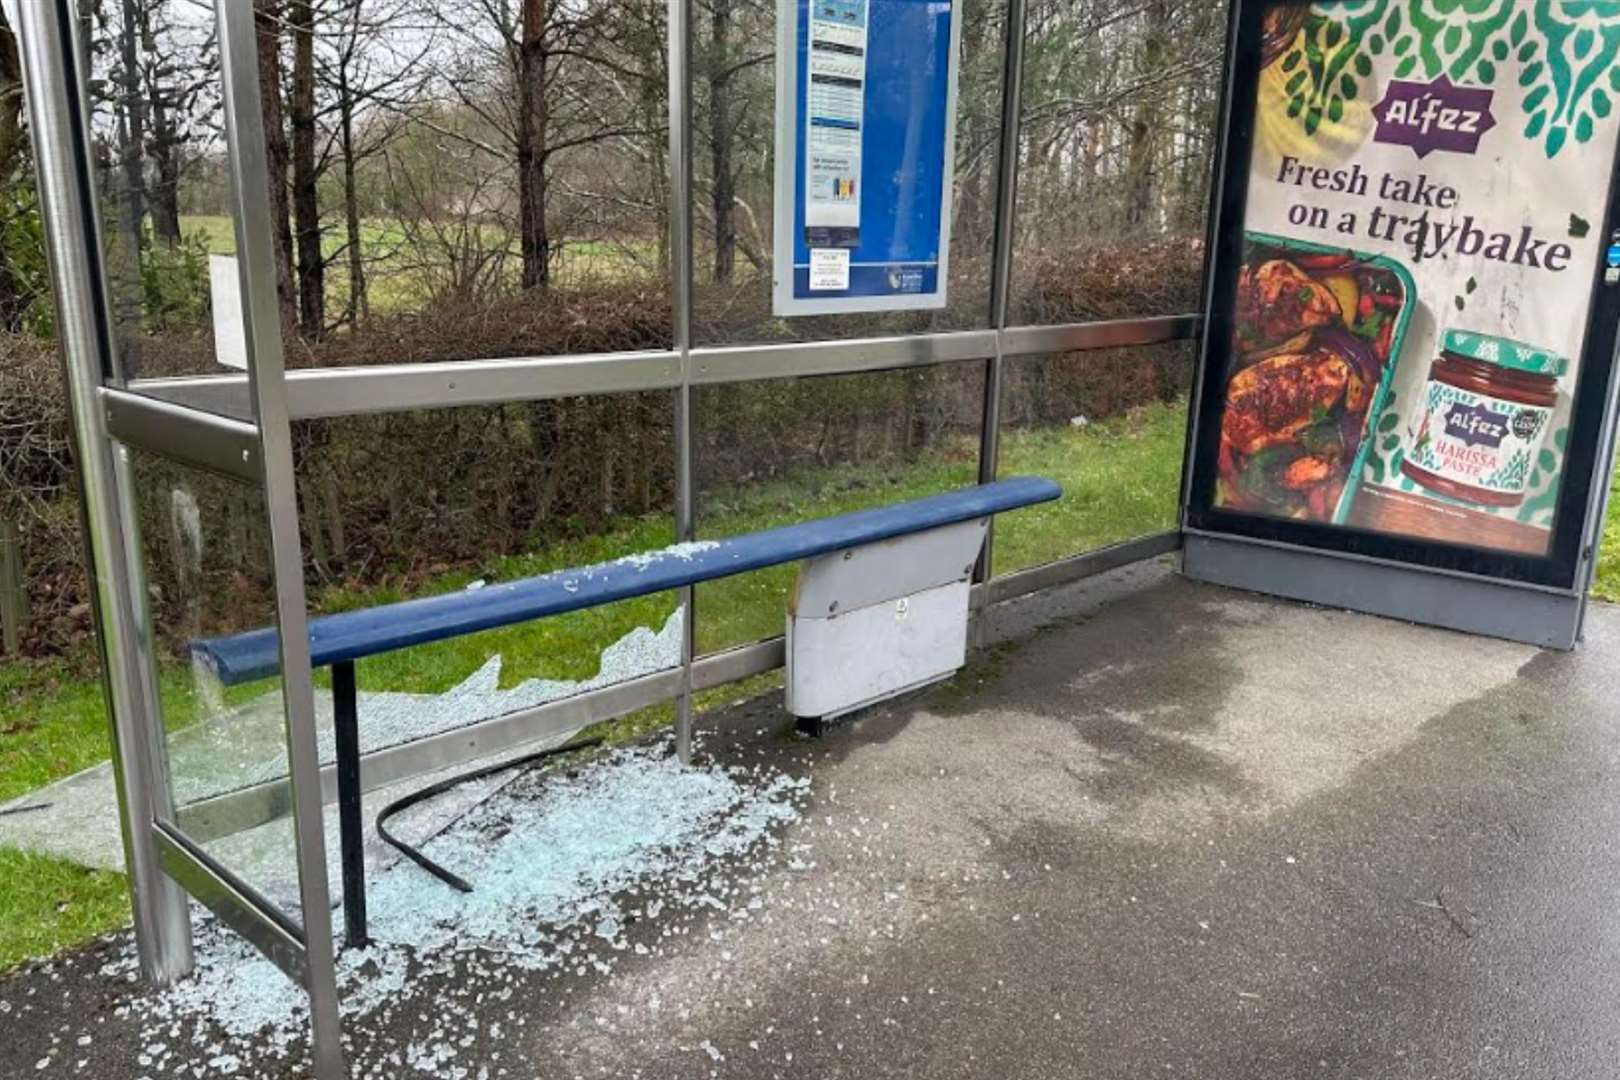 One of the damaged bus shelters in Trinity Road, Kennington. Picture: Lucy New